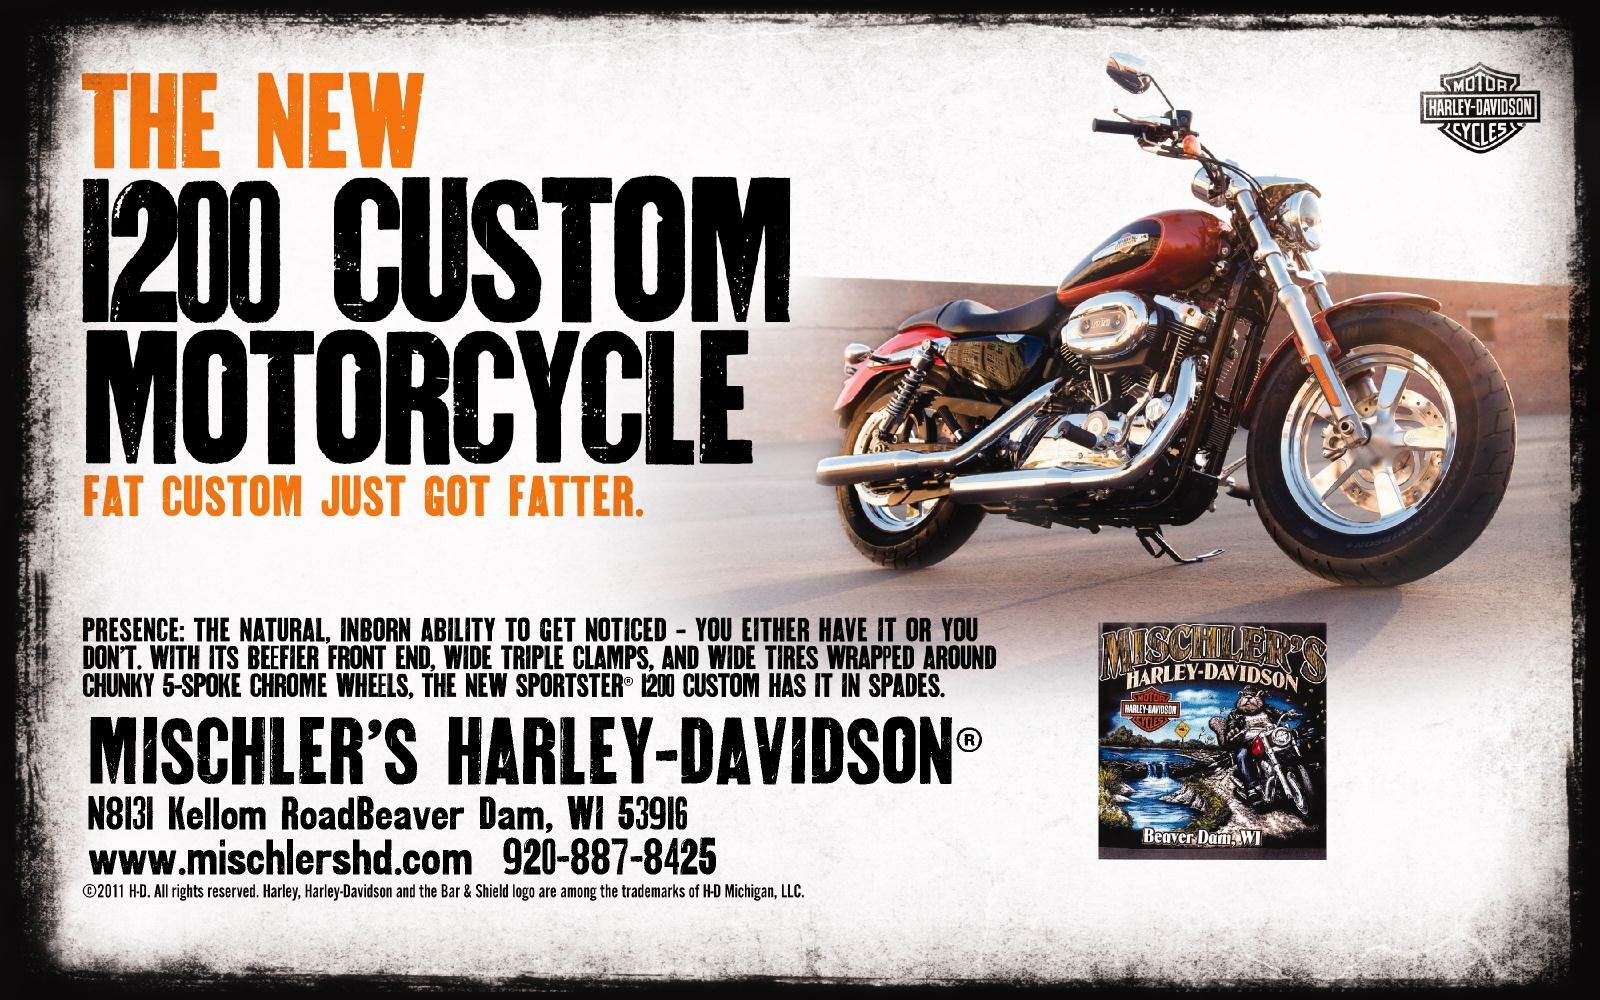 Mischler's Harley-Davidson of Beaver Dam, Wisconsin carries 2010 and 2011 Harleys in our showroom